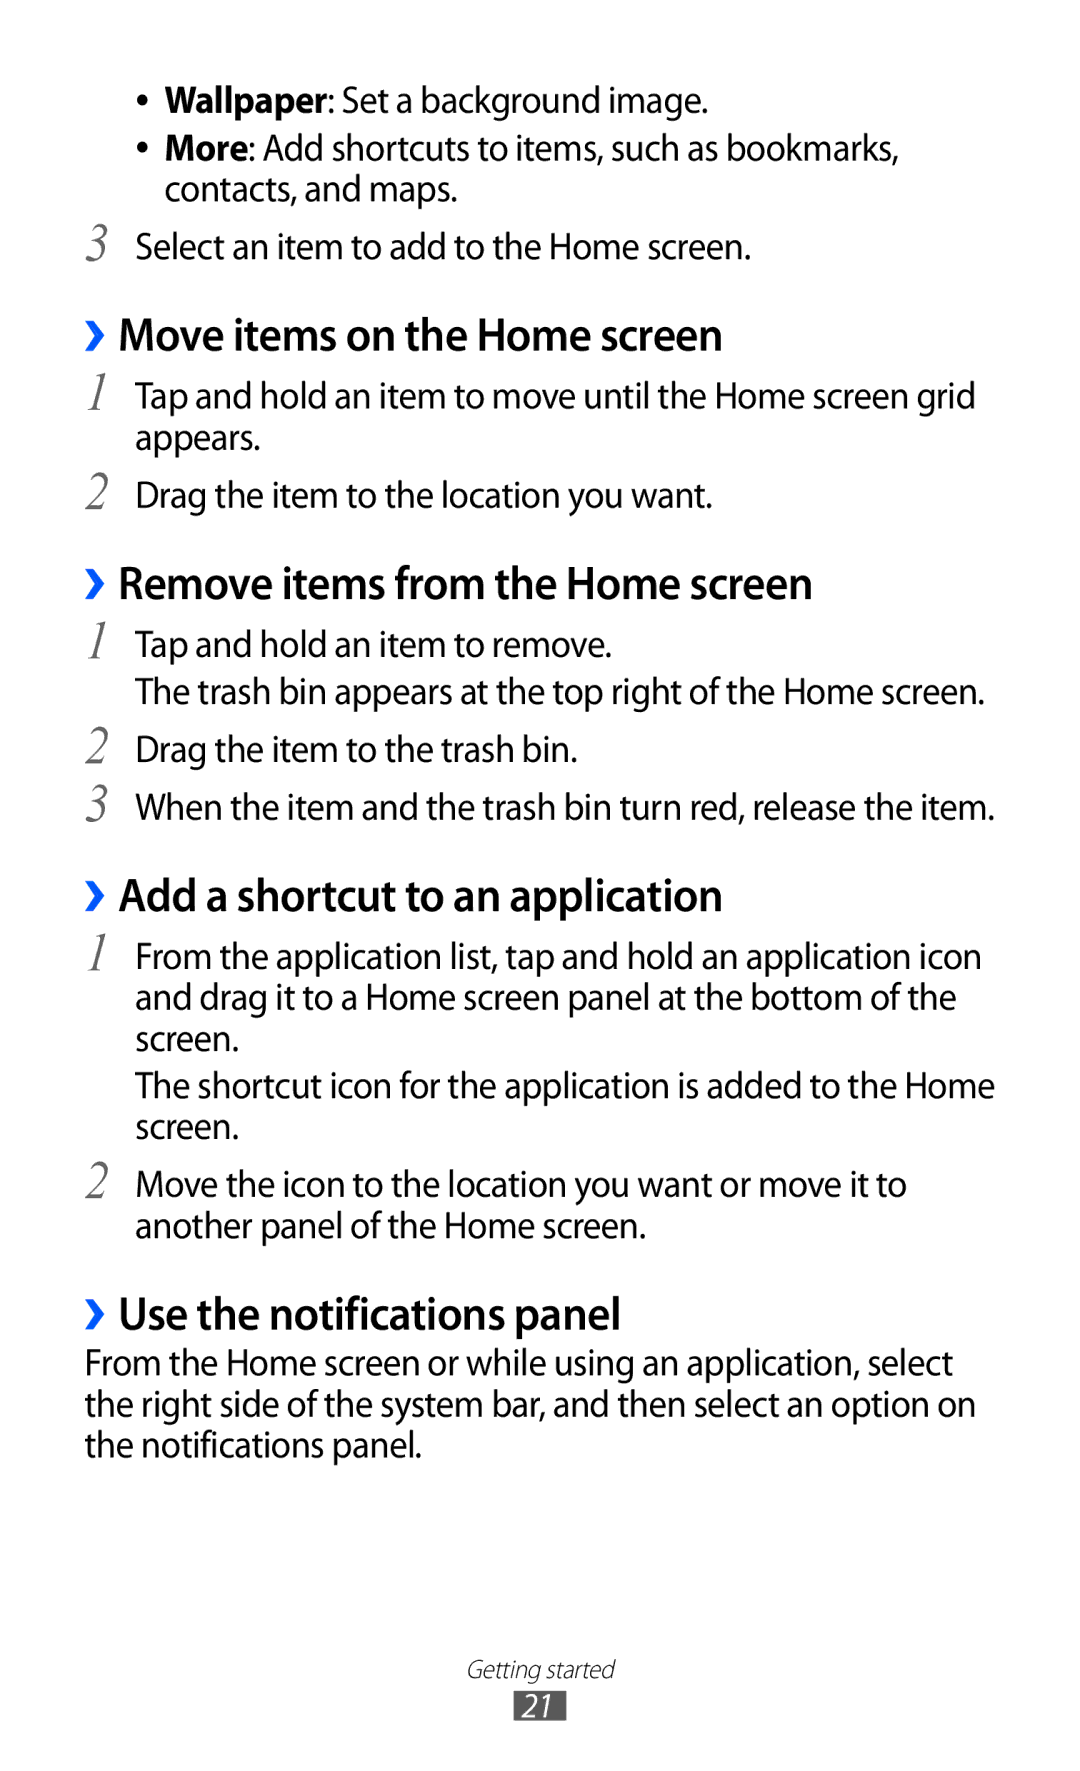 Samsung GT-P7500 ››Move items on the Home screen, ››Remove items from the Home screen, ››Add a shortcut to an application 